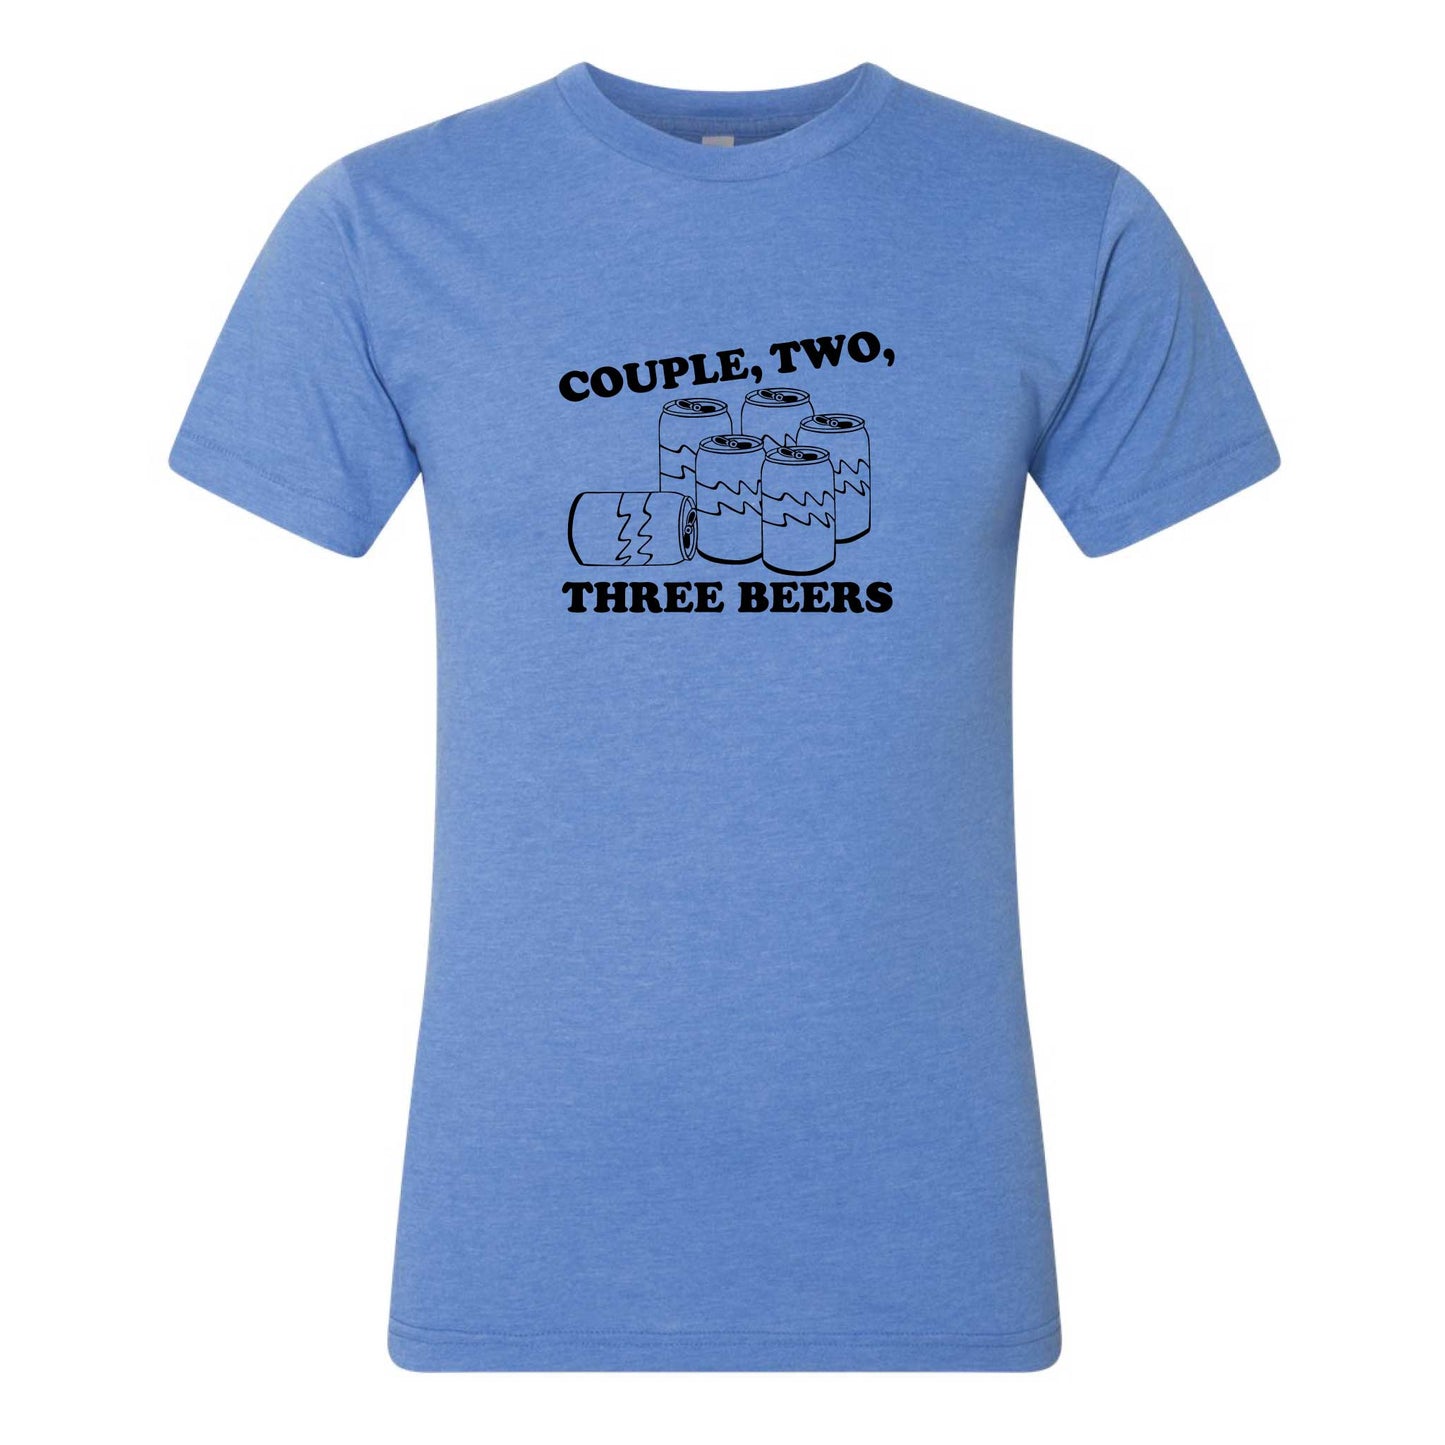 Couple, Two, Three Beers T-Shirt